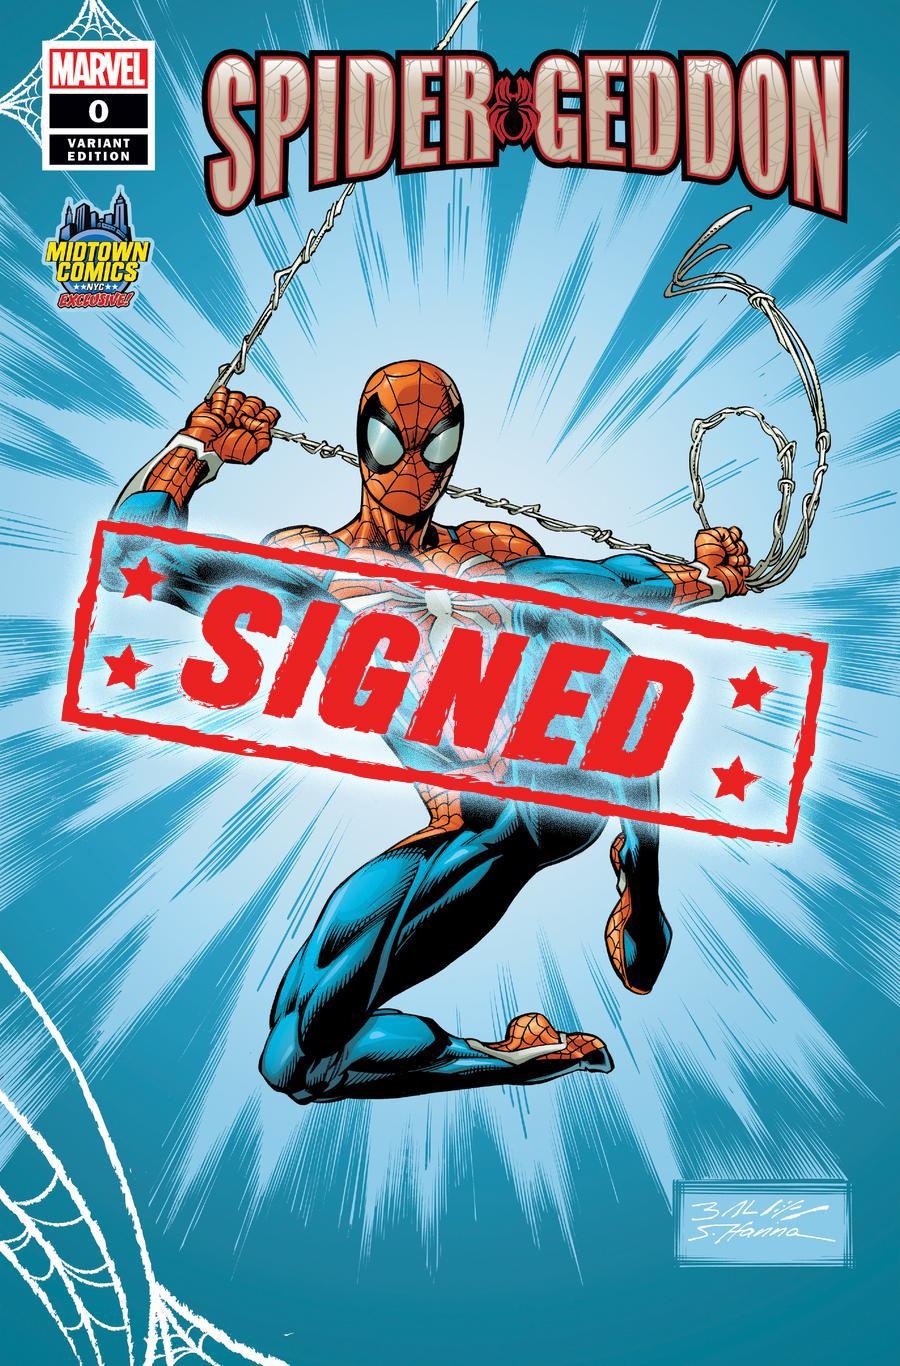 Spider-Geddon #0  Midtown Exclusive Cover C Mark Bagley PS4 Costume Variant Cover Signed By Mark Bagley